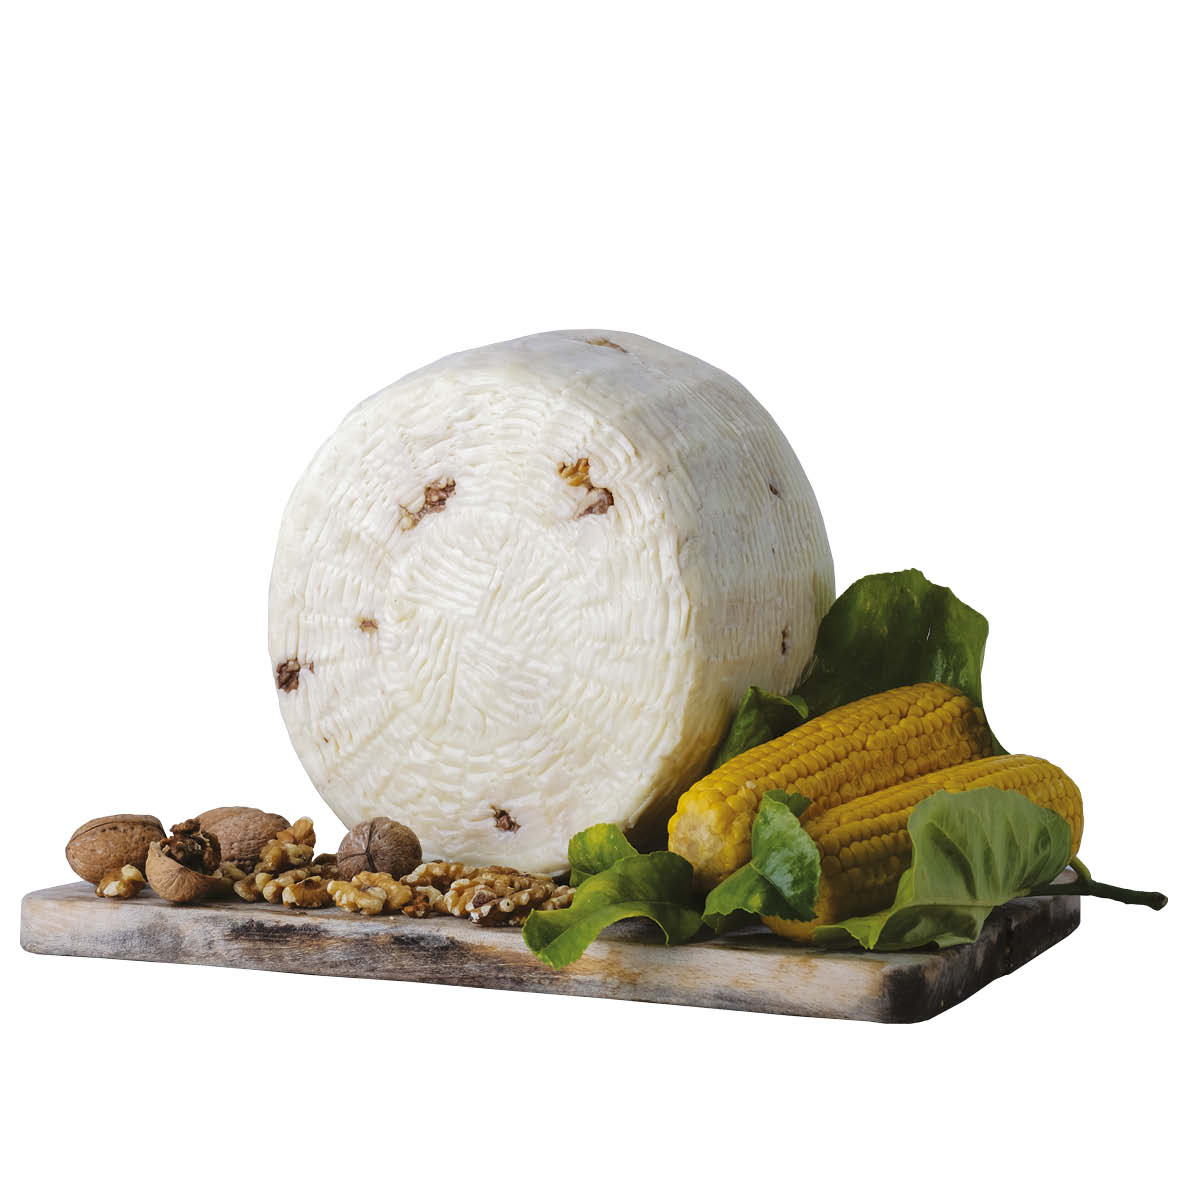 Primo Sale cheese with walnuts